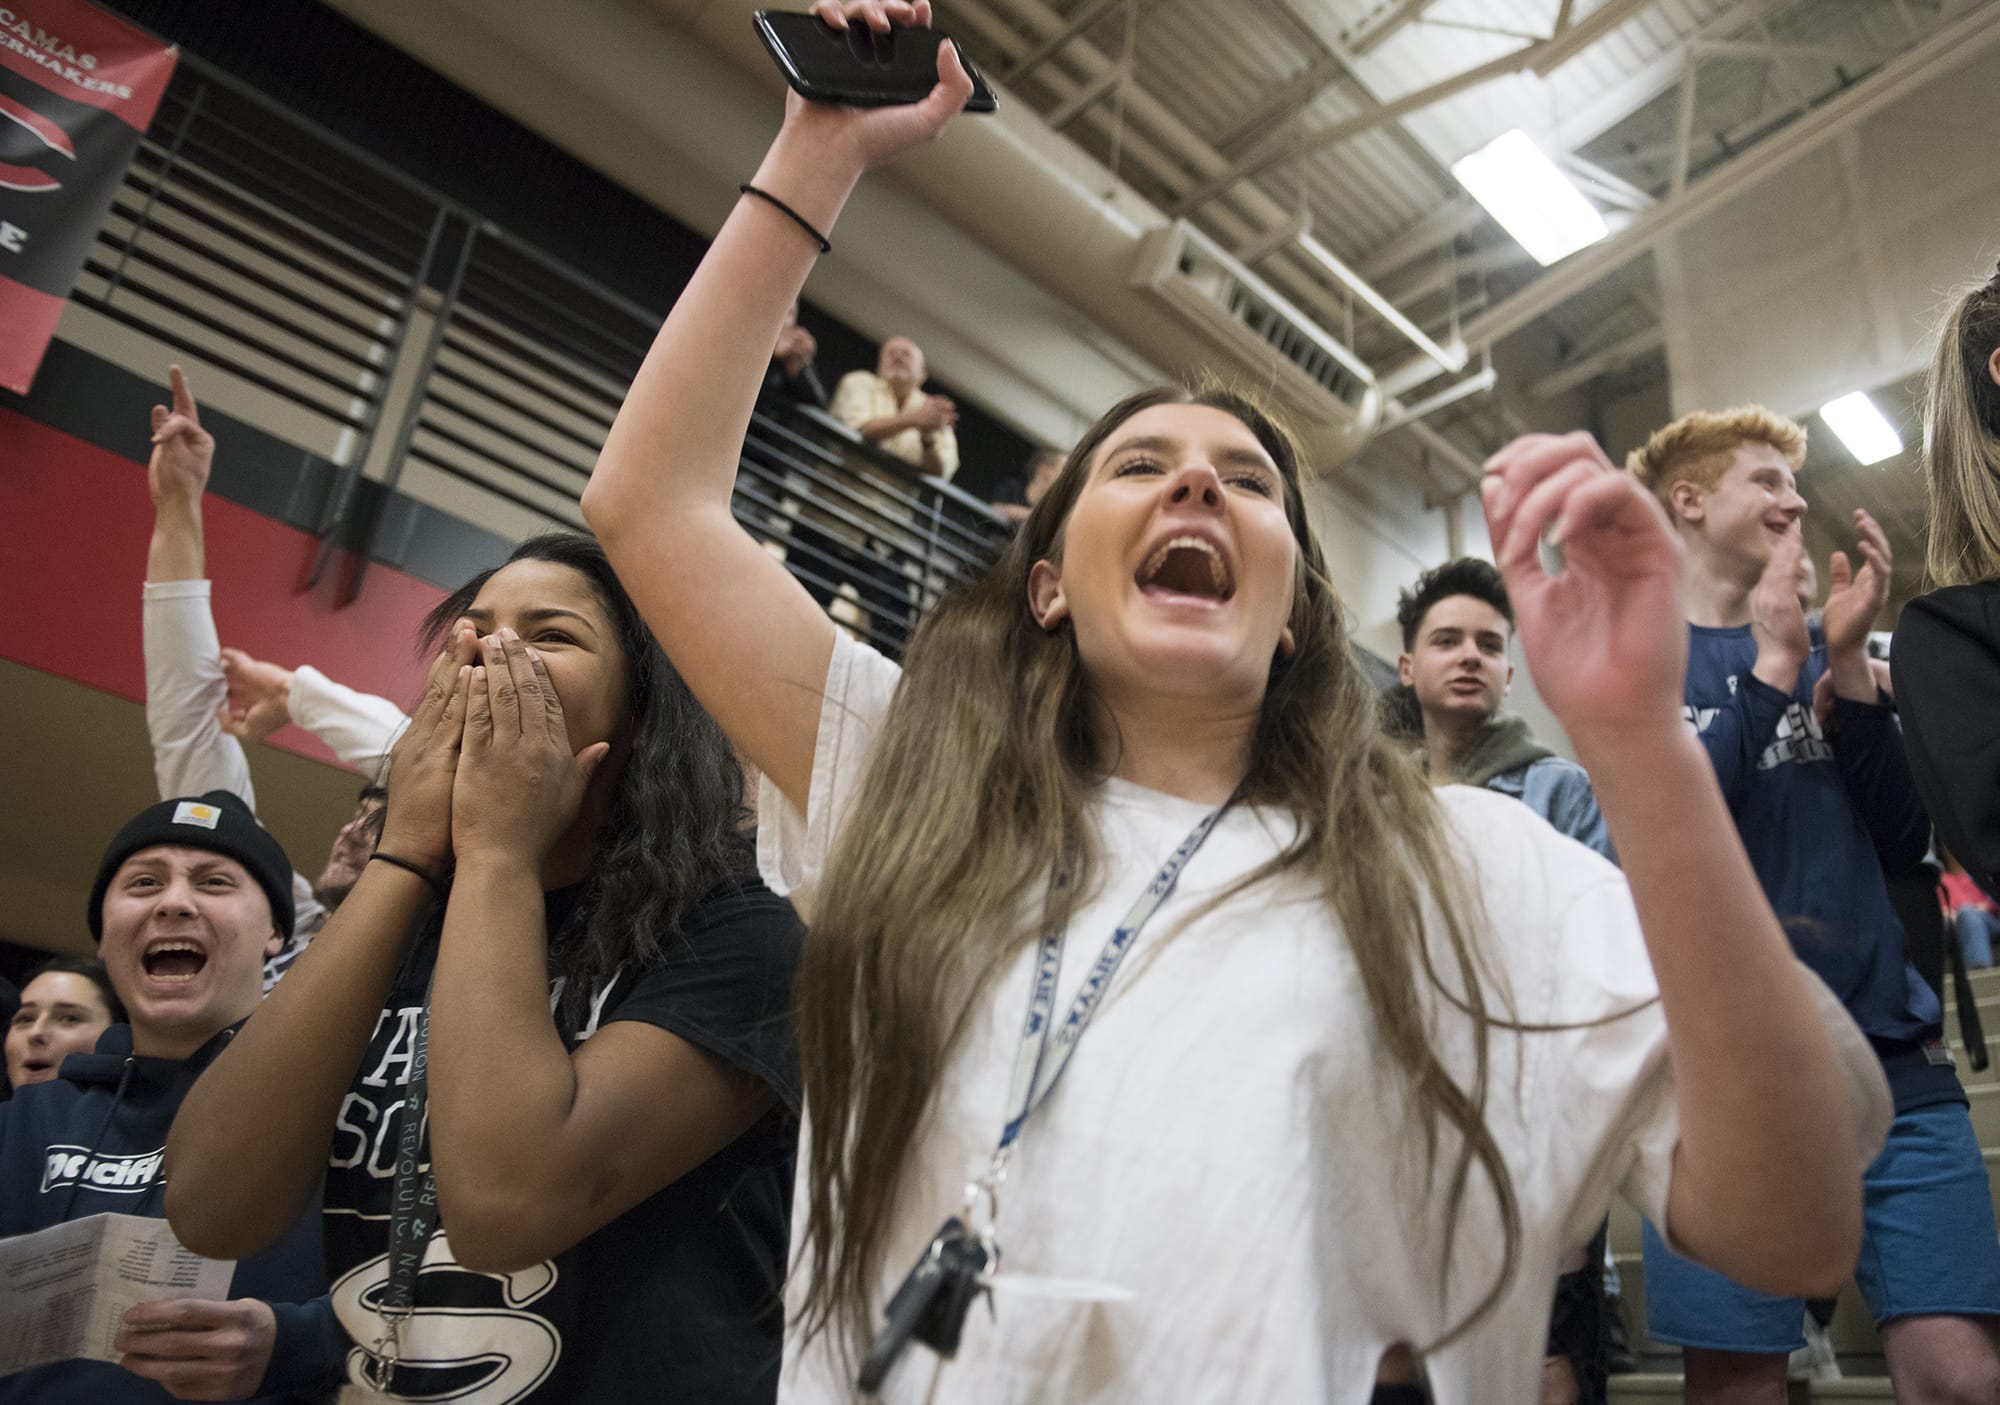 Skyview senior Evan Aguilar, left, sophomore Mikelle Anthony, center, and junior Kayla Rakoz, right, cheer on their team during the 4A GSHL opener against Camas Wednesday night, Jan. 3, 2018 at Camas High School.